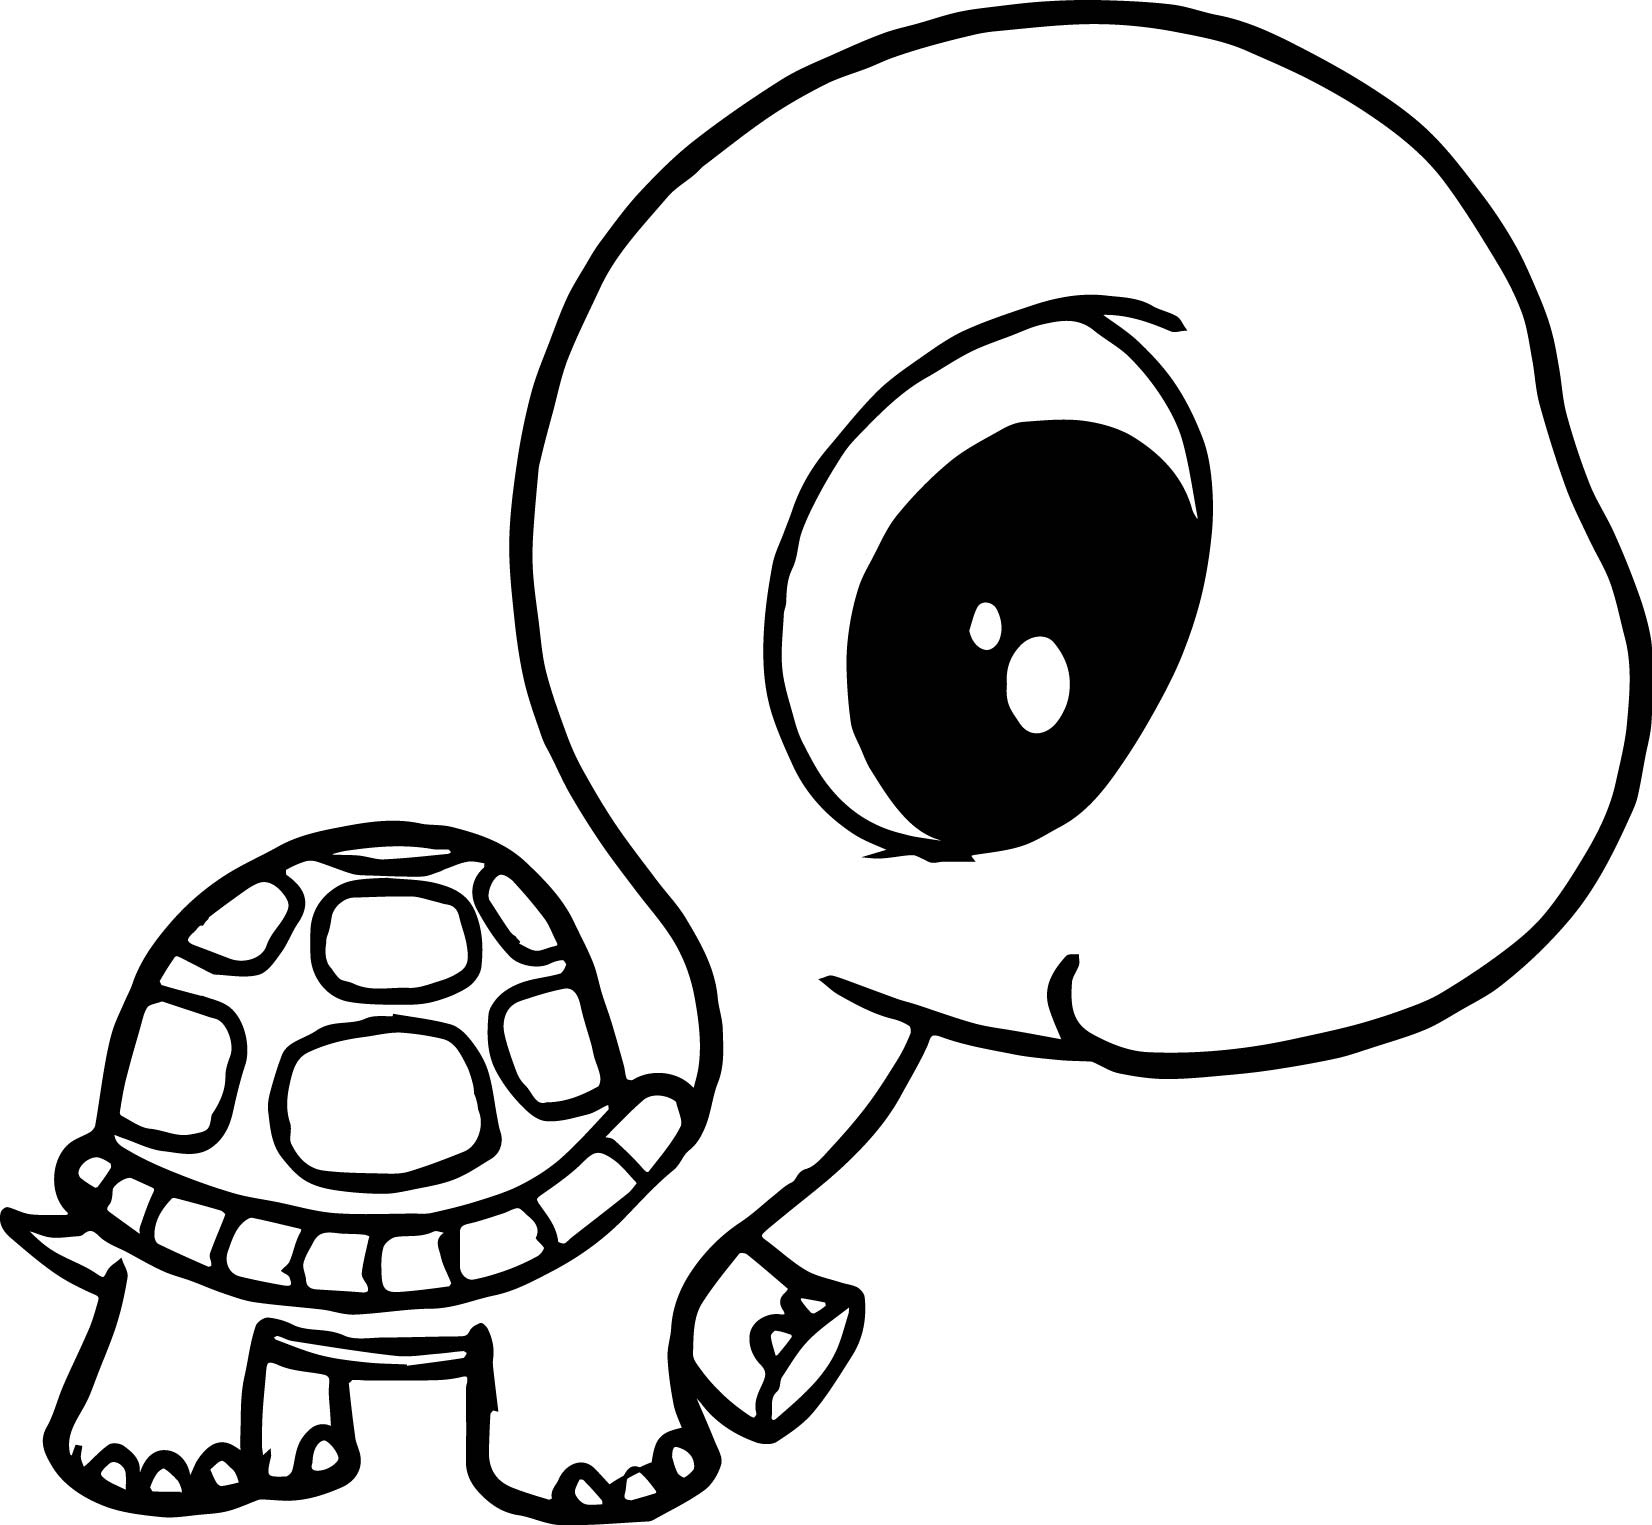 free printable turtle coloring pages for kids - turtles free to color ...